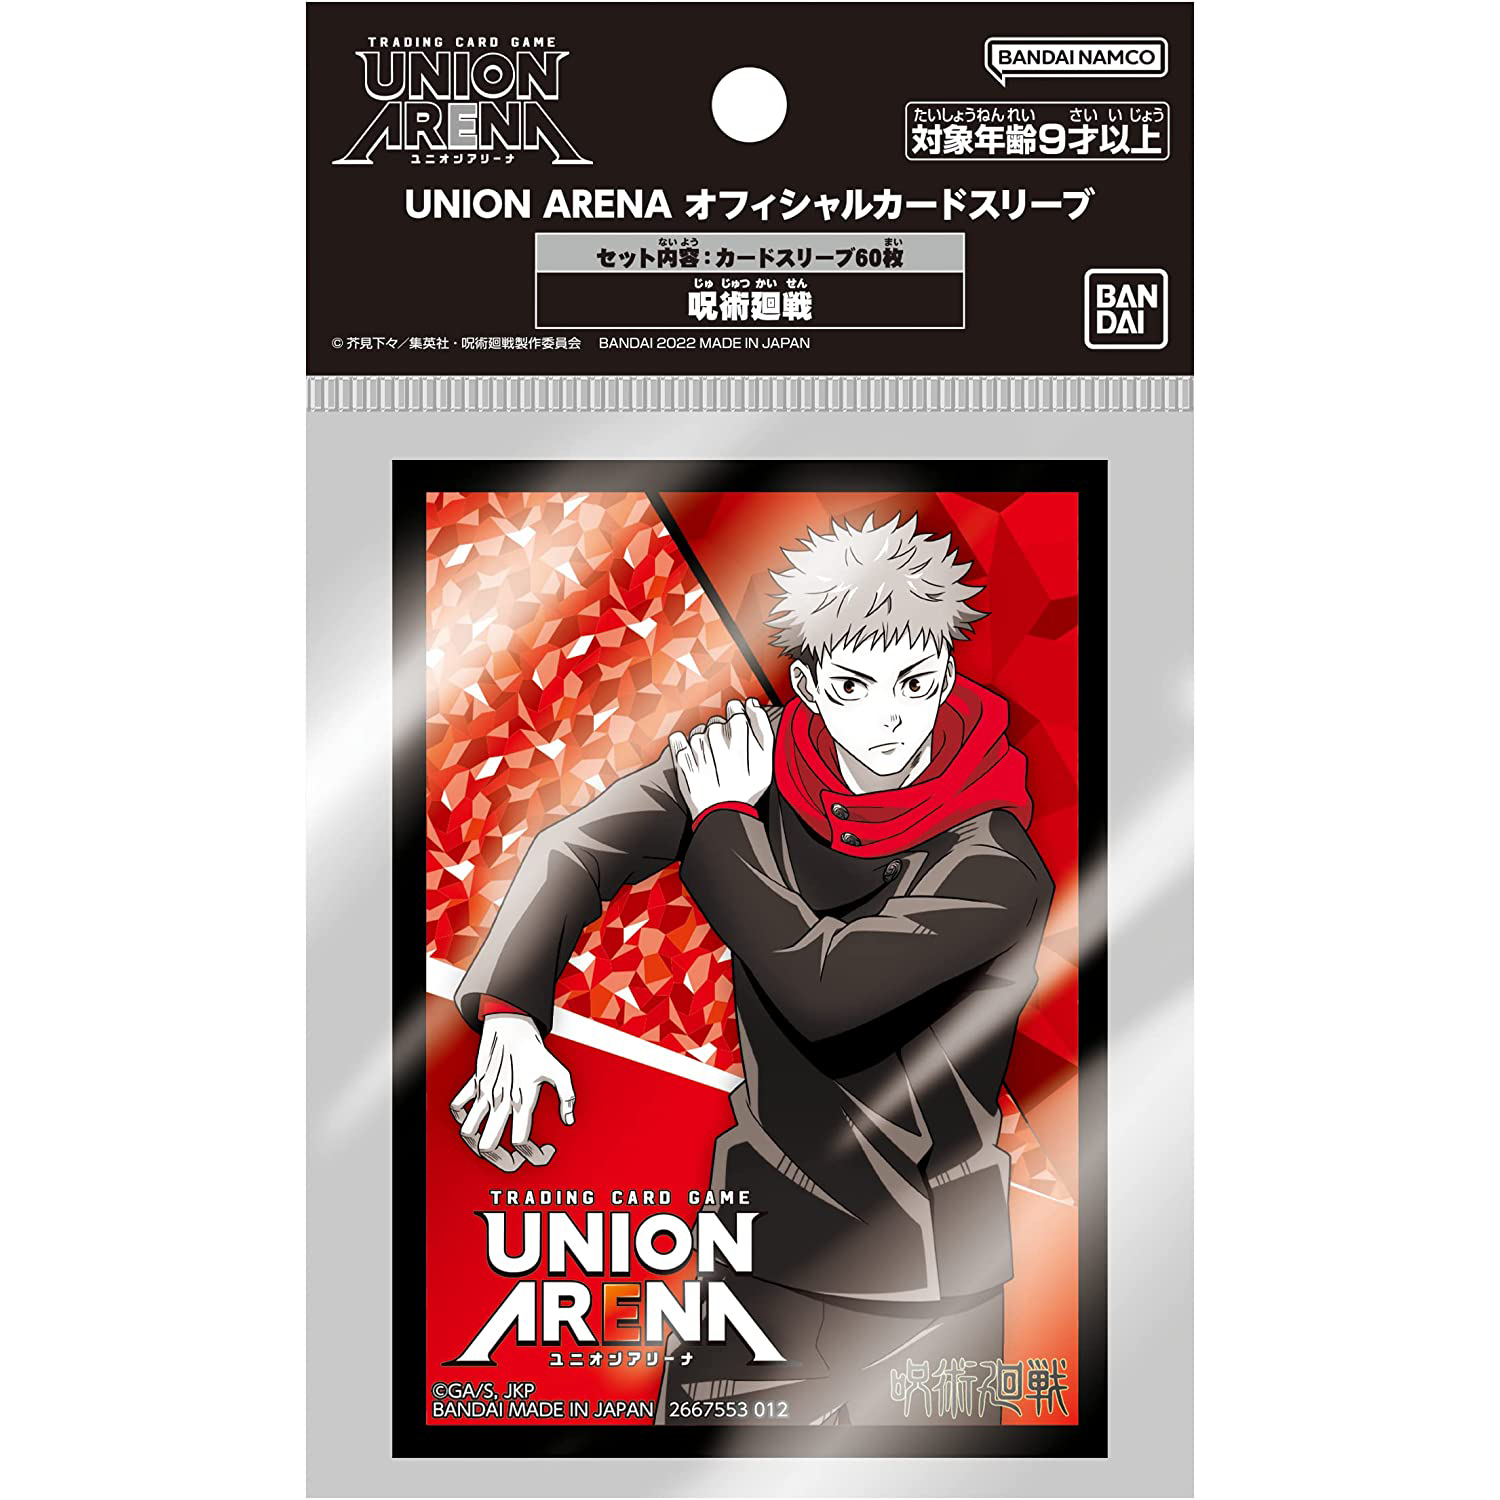 TRADING CARD GAME UNION ARENA Official Card Sleeve JUJUTSU KAISEN